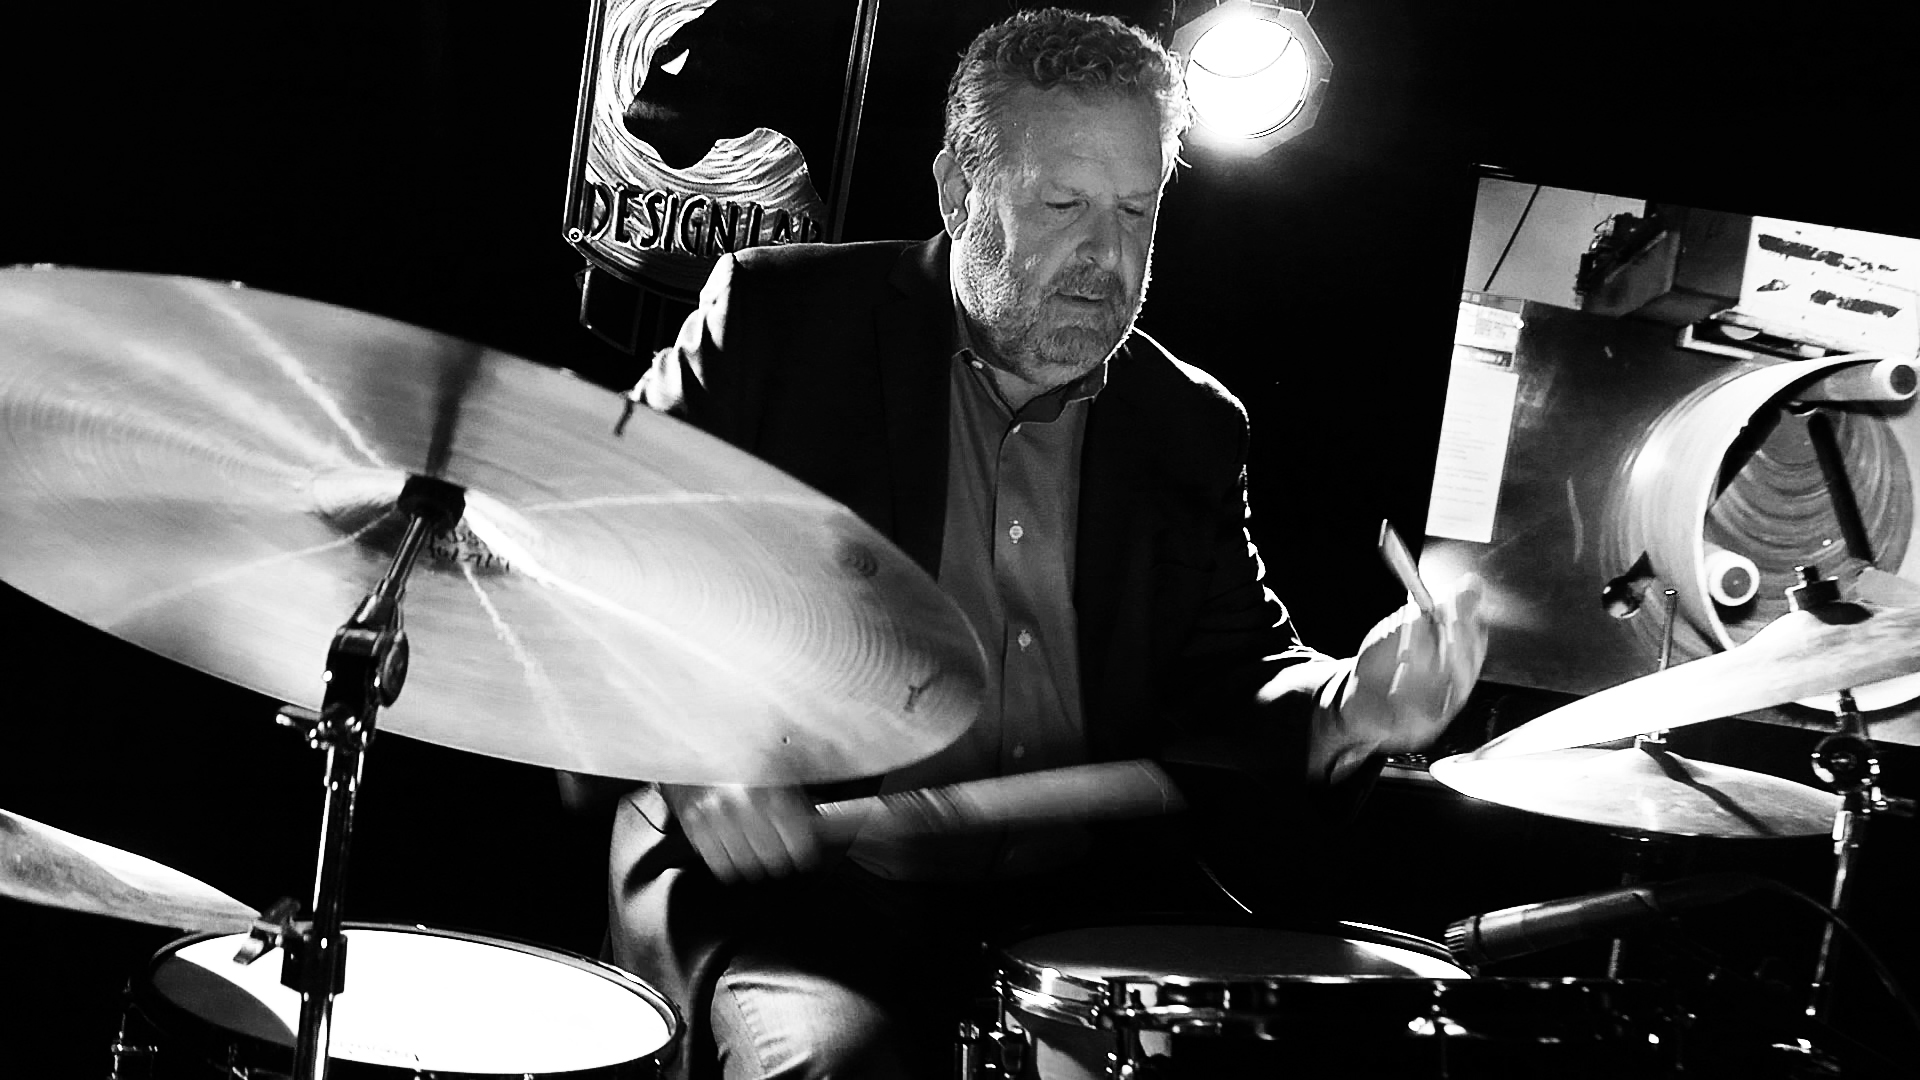 MAPEX Welcomes Jeff Hamilton To The MAPEX Roster Of Artists